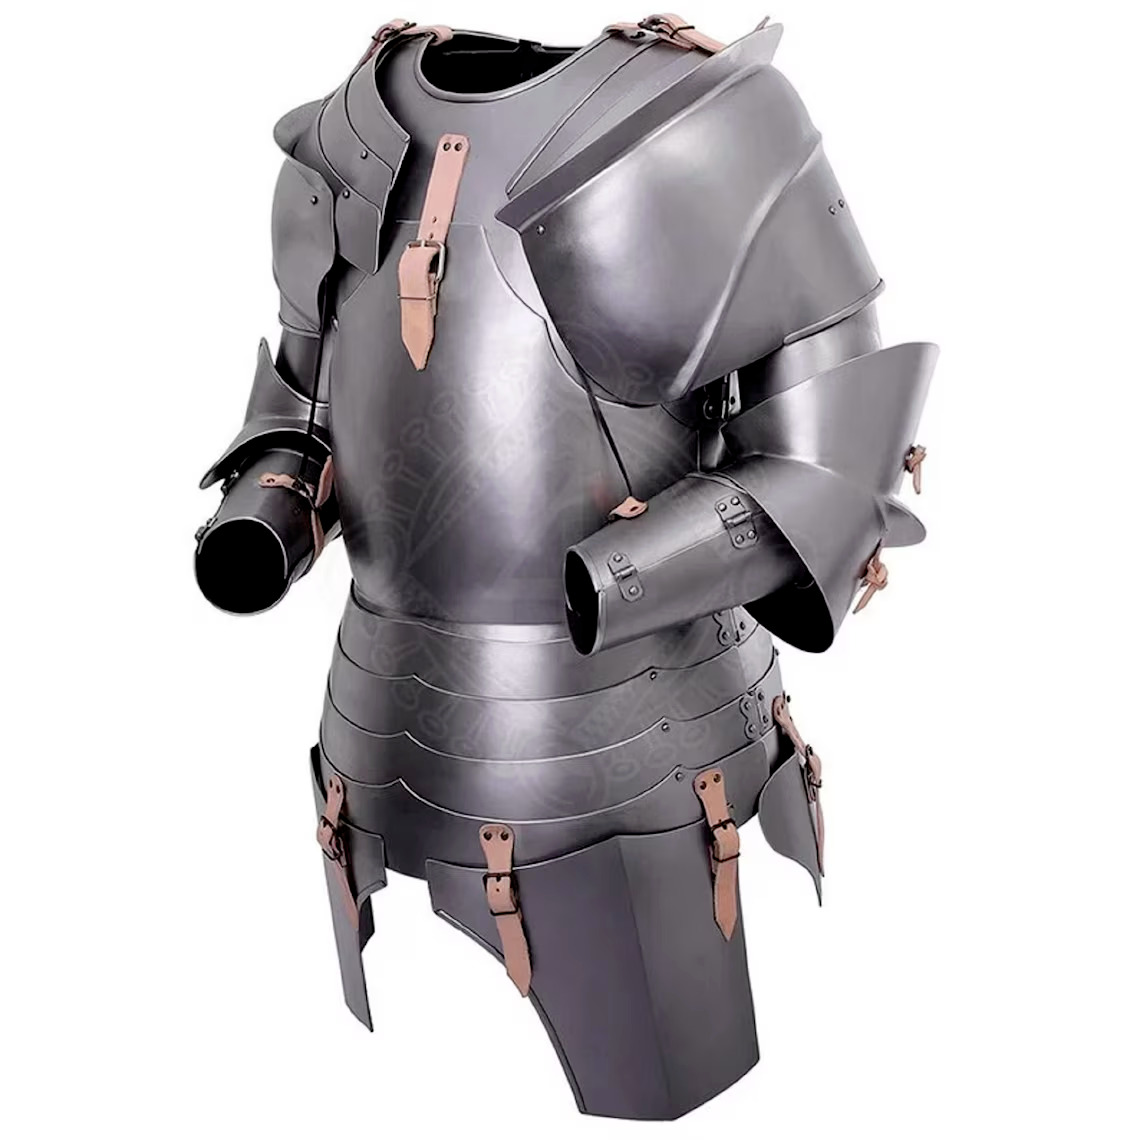 Medieval Armor Suit | Steel Medieval Full Body Plated Armor Suit | Undead Knight